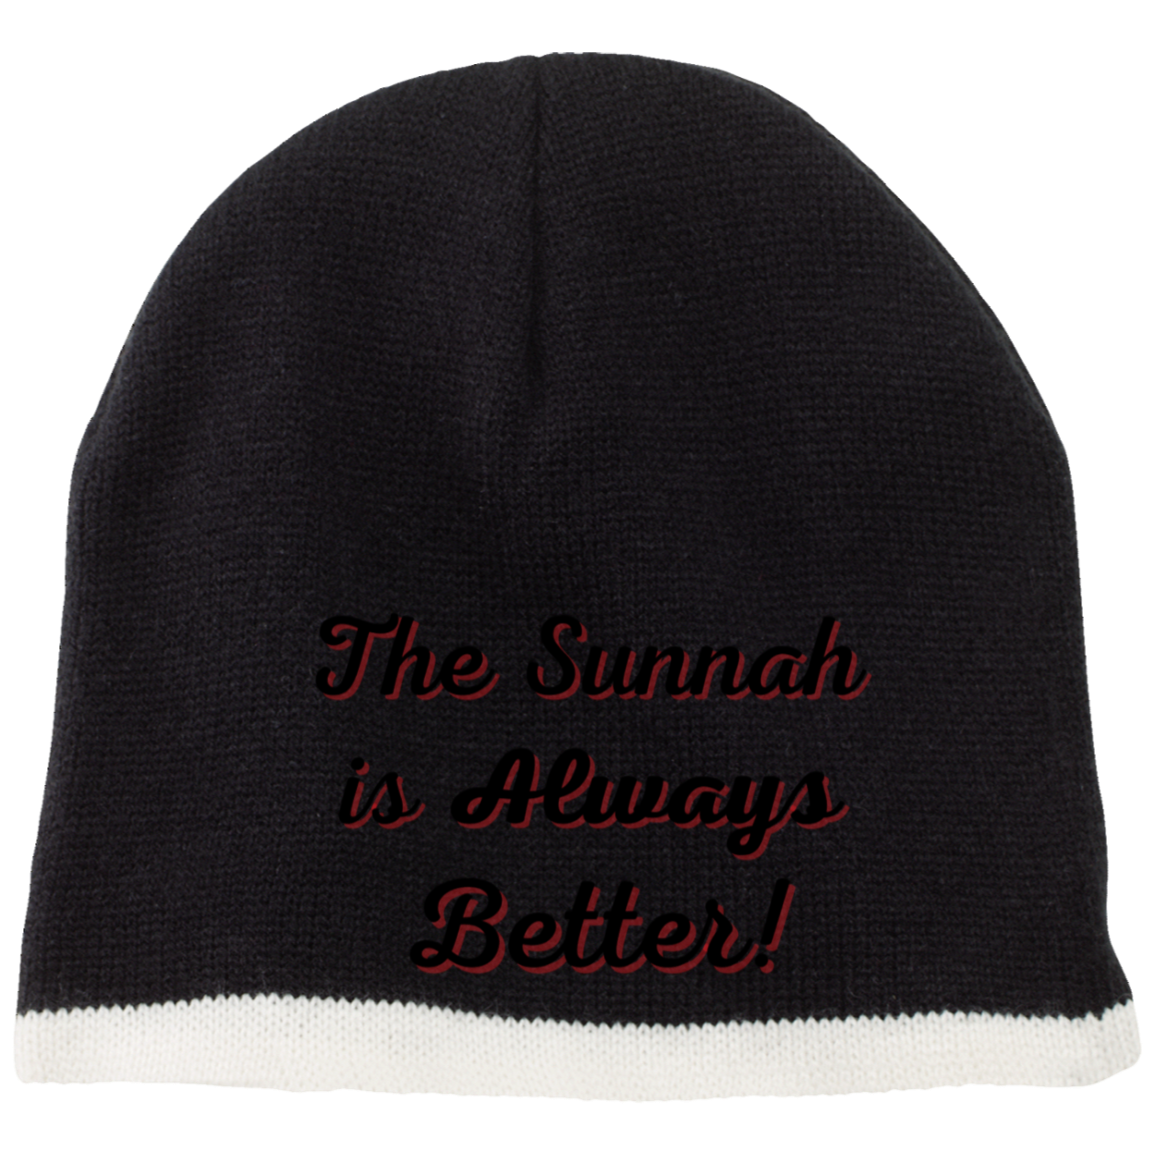 THE SUNNAH IS ALWAYS BETTER! Embroidered 100% Acrylic Beanie (More Colors Options)